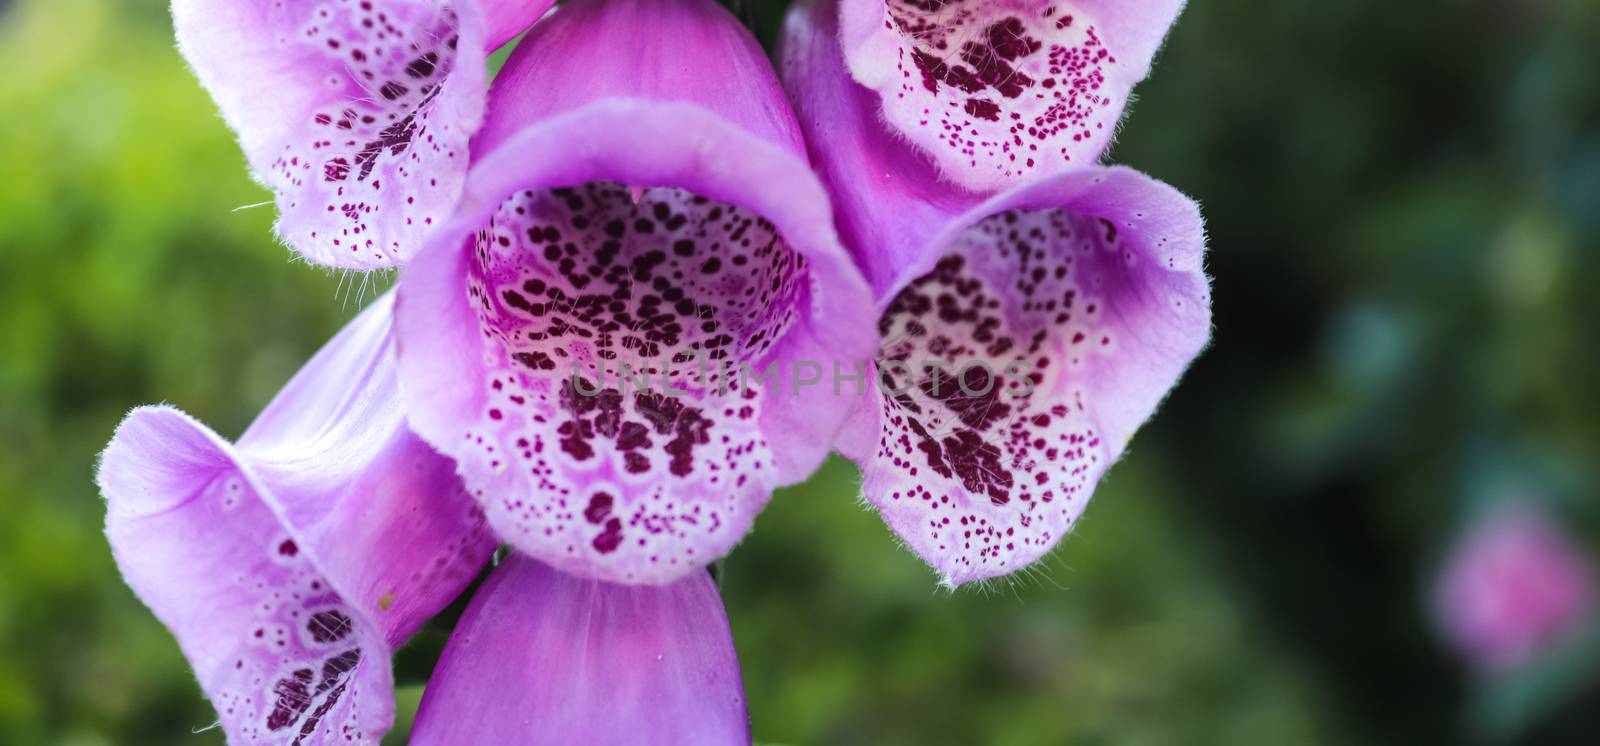 Beautiful digitalis flower close up in white and purple color by MP_foto71